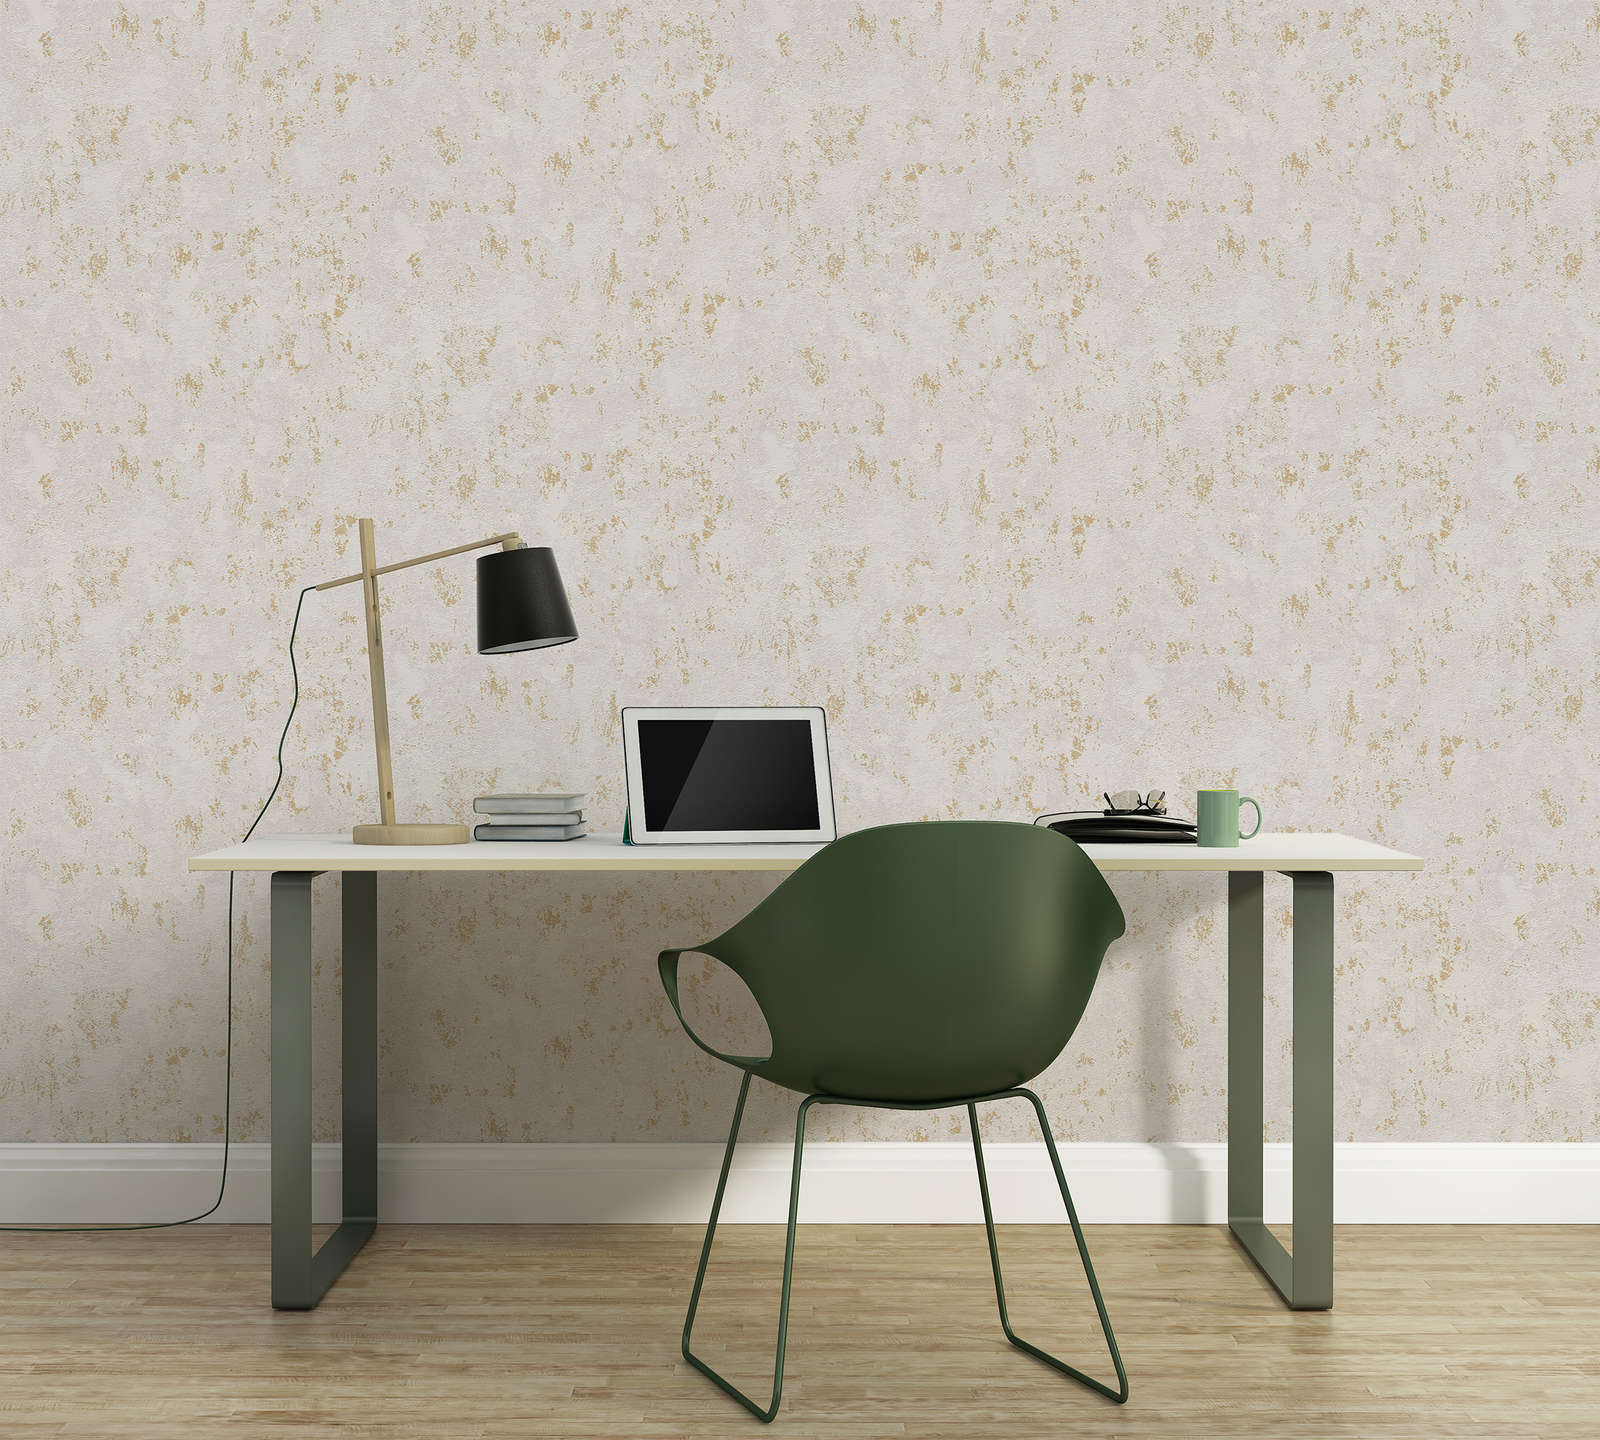             Non-woven wallpaper in plaster look with gold accents - beige, grey, gold
        